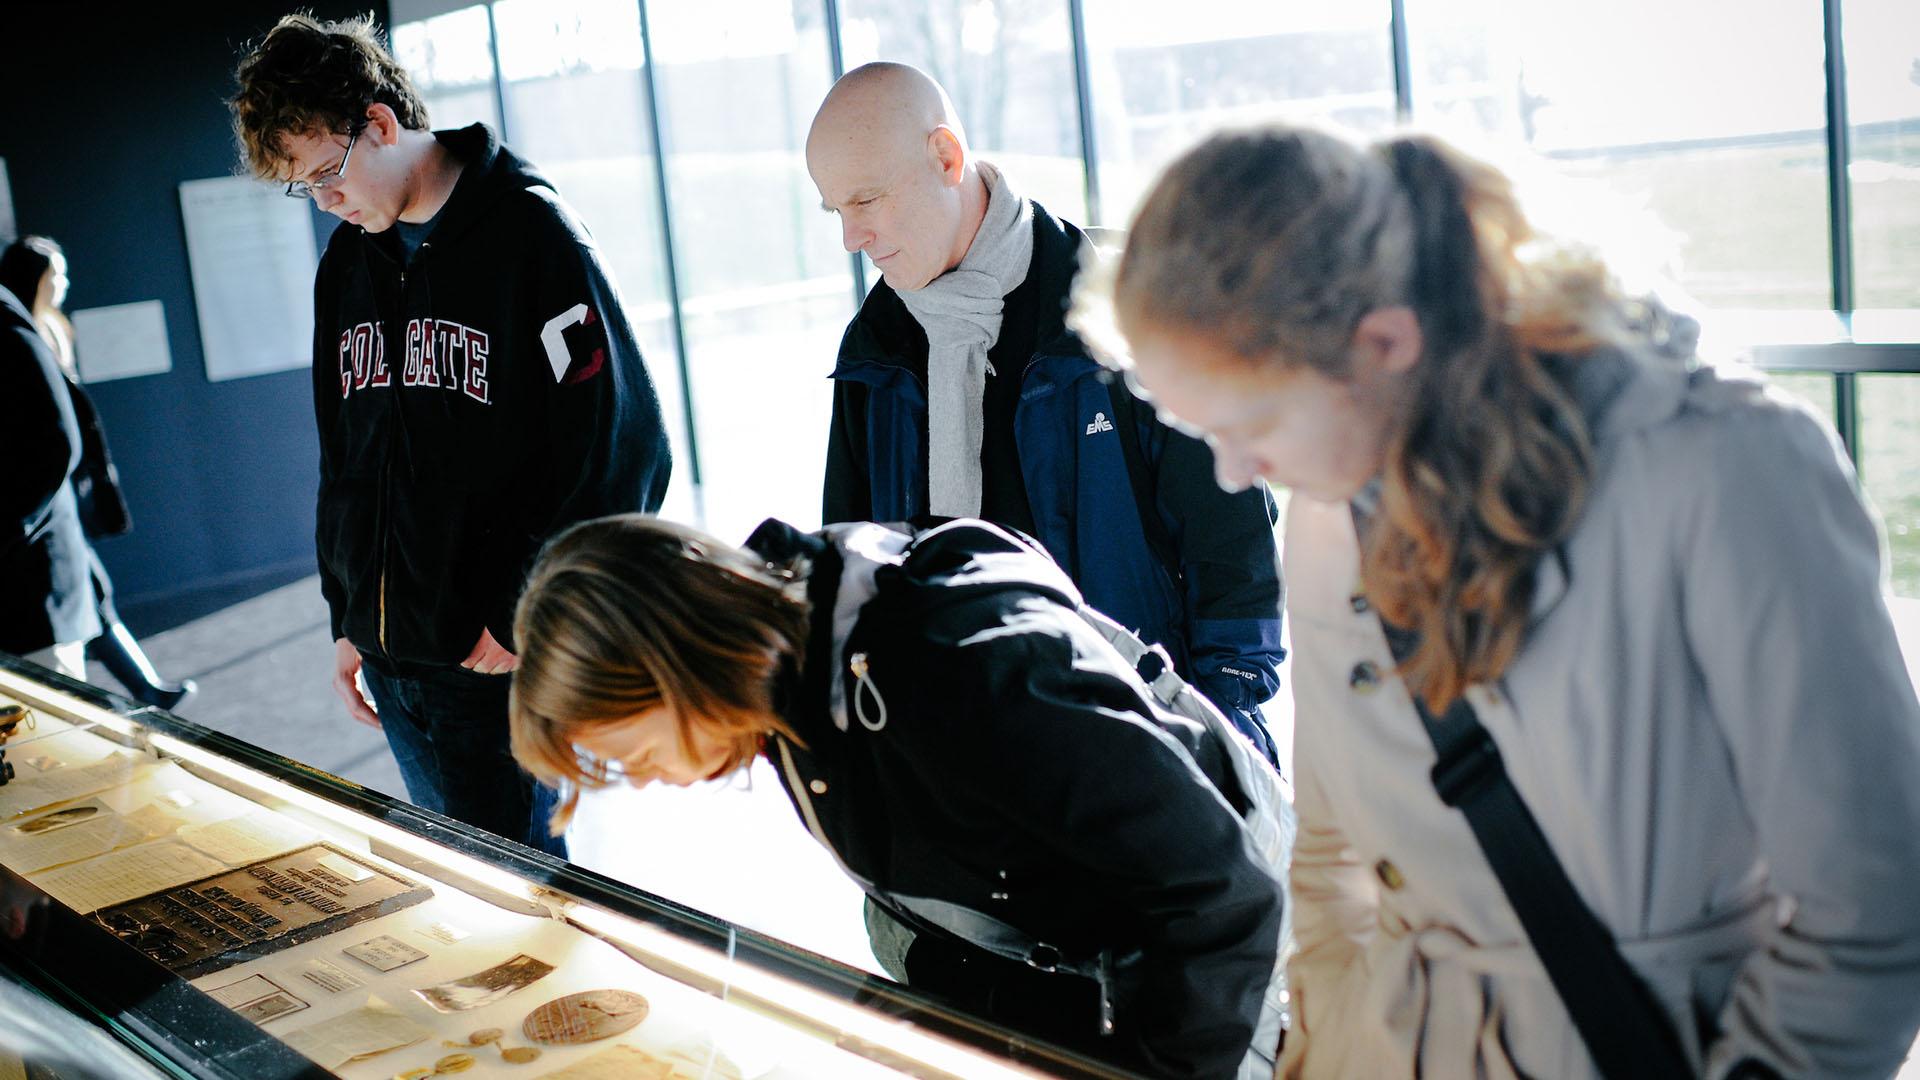 Professor Andy Rotter and students examine a museum case in Belgium